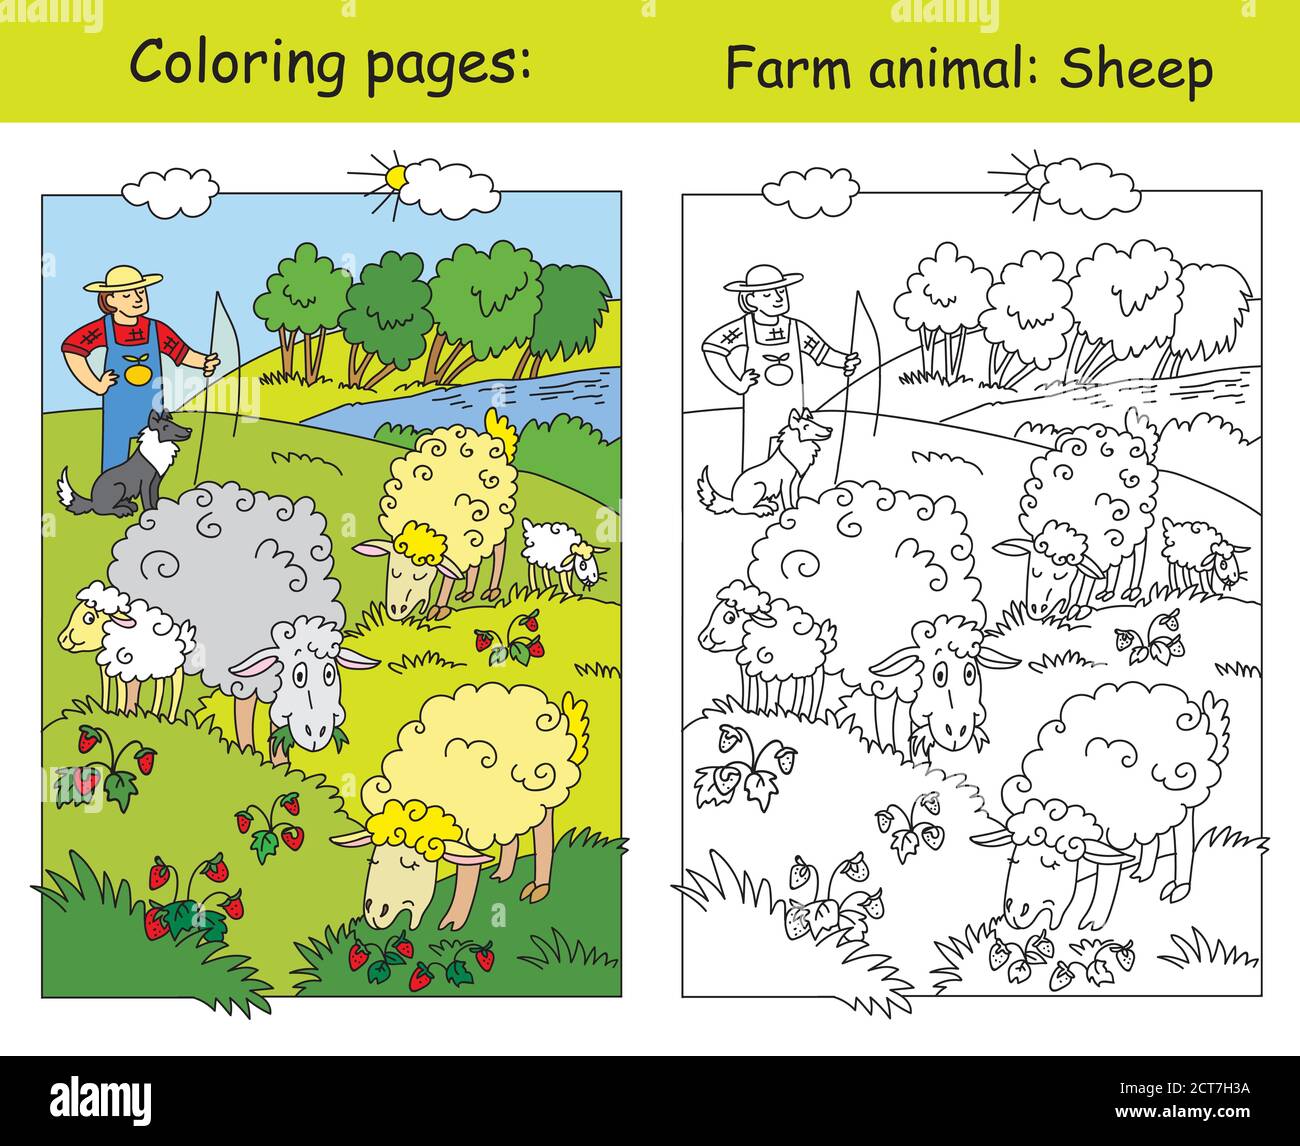 Coloring pages with cute sheeps gracing on meadow and shepherd with his dog. Cartoon vector illustration. Coloring and colored image of sheep. Stock i Stock Vector